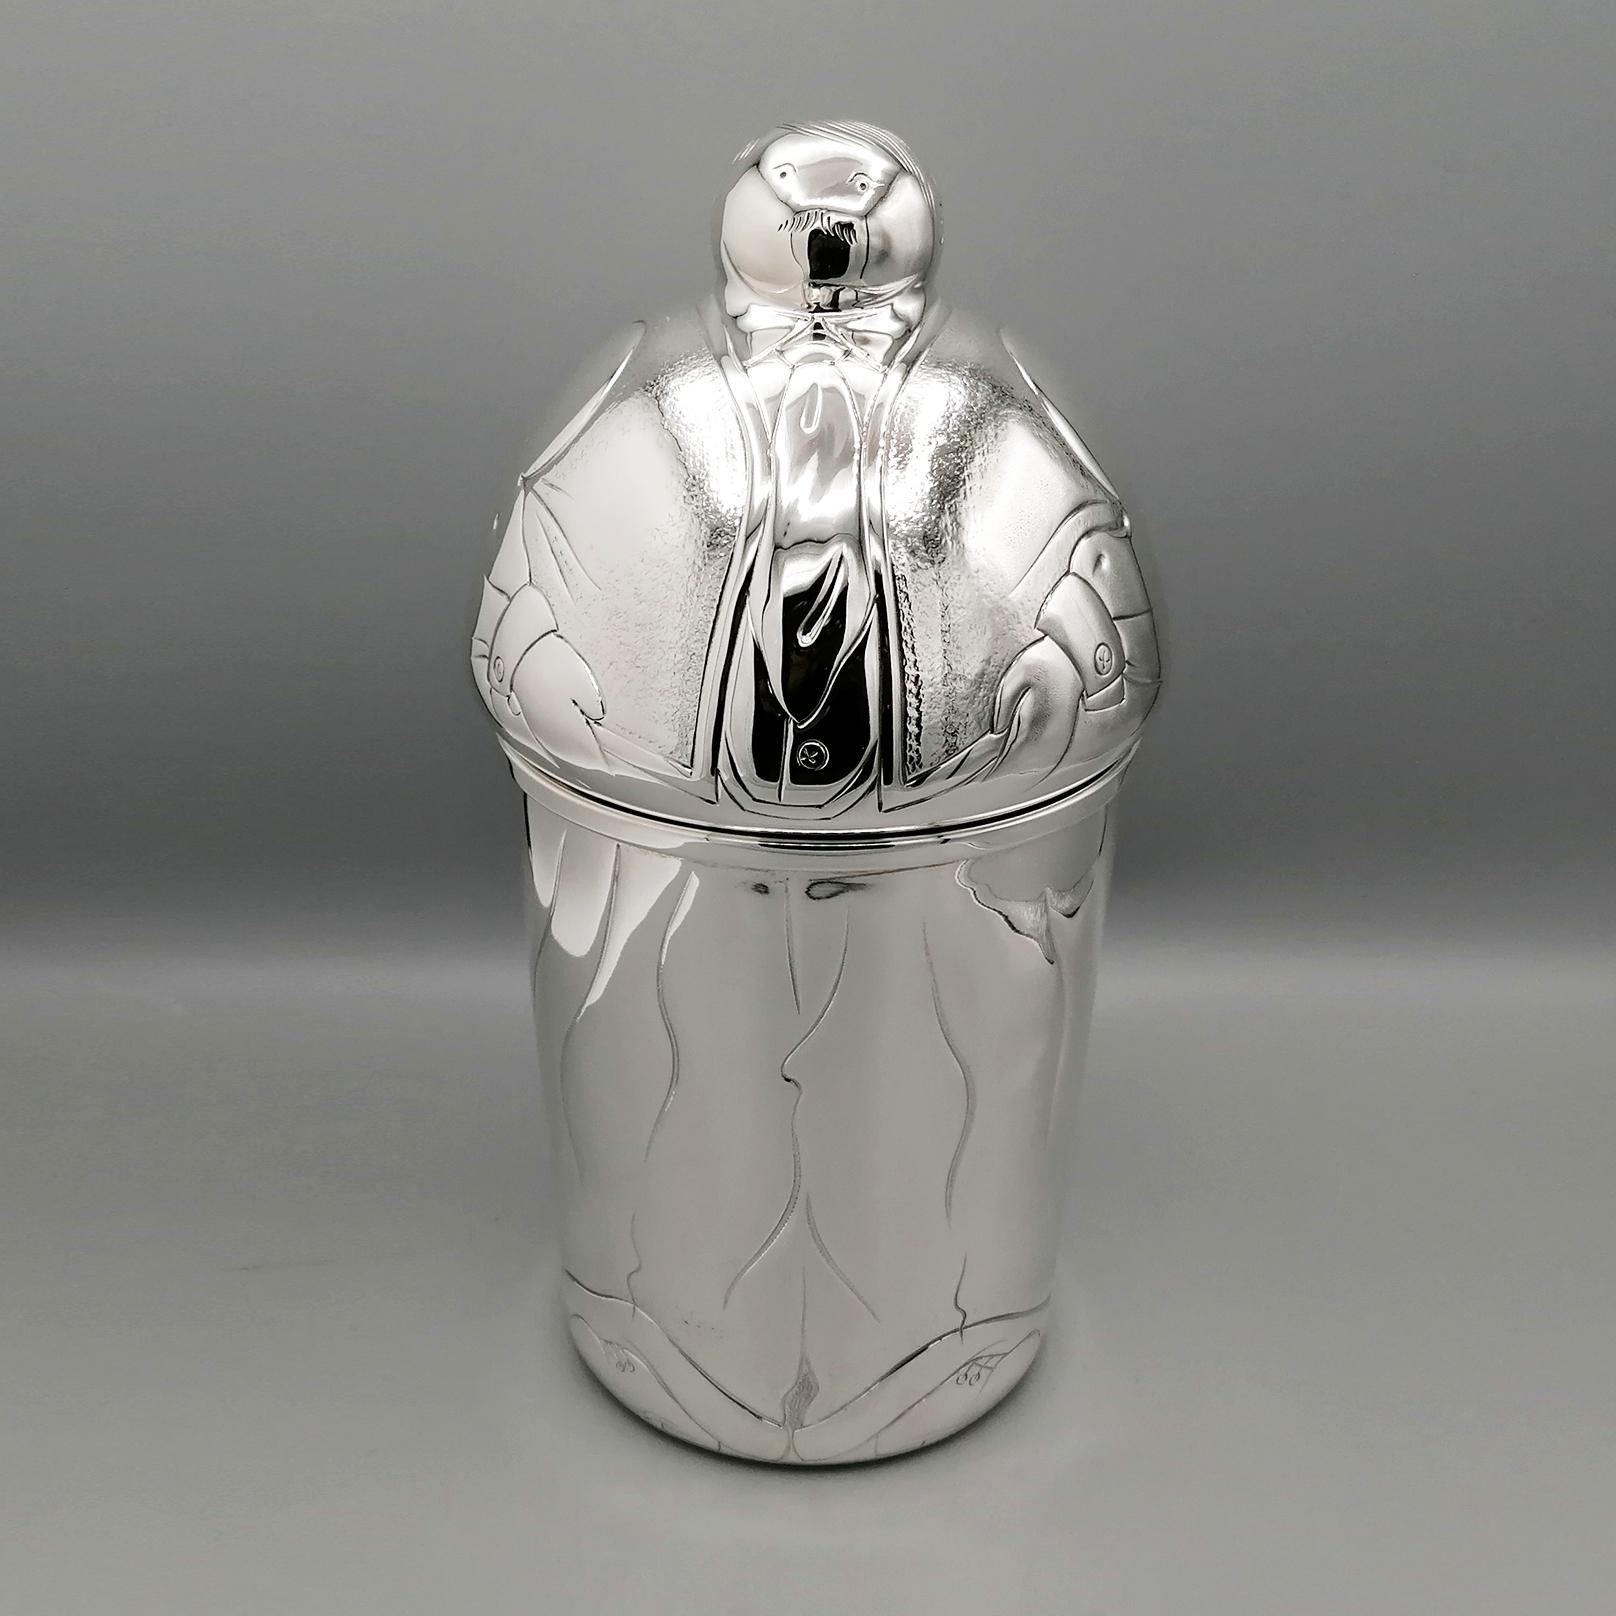 Extravagant and very particular sterling silver wine cooler “ Glacette” depicting a man reminiscent of the style of 